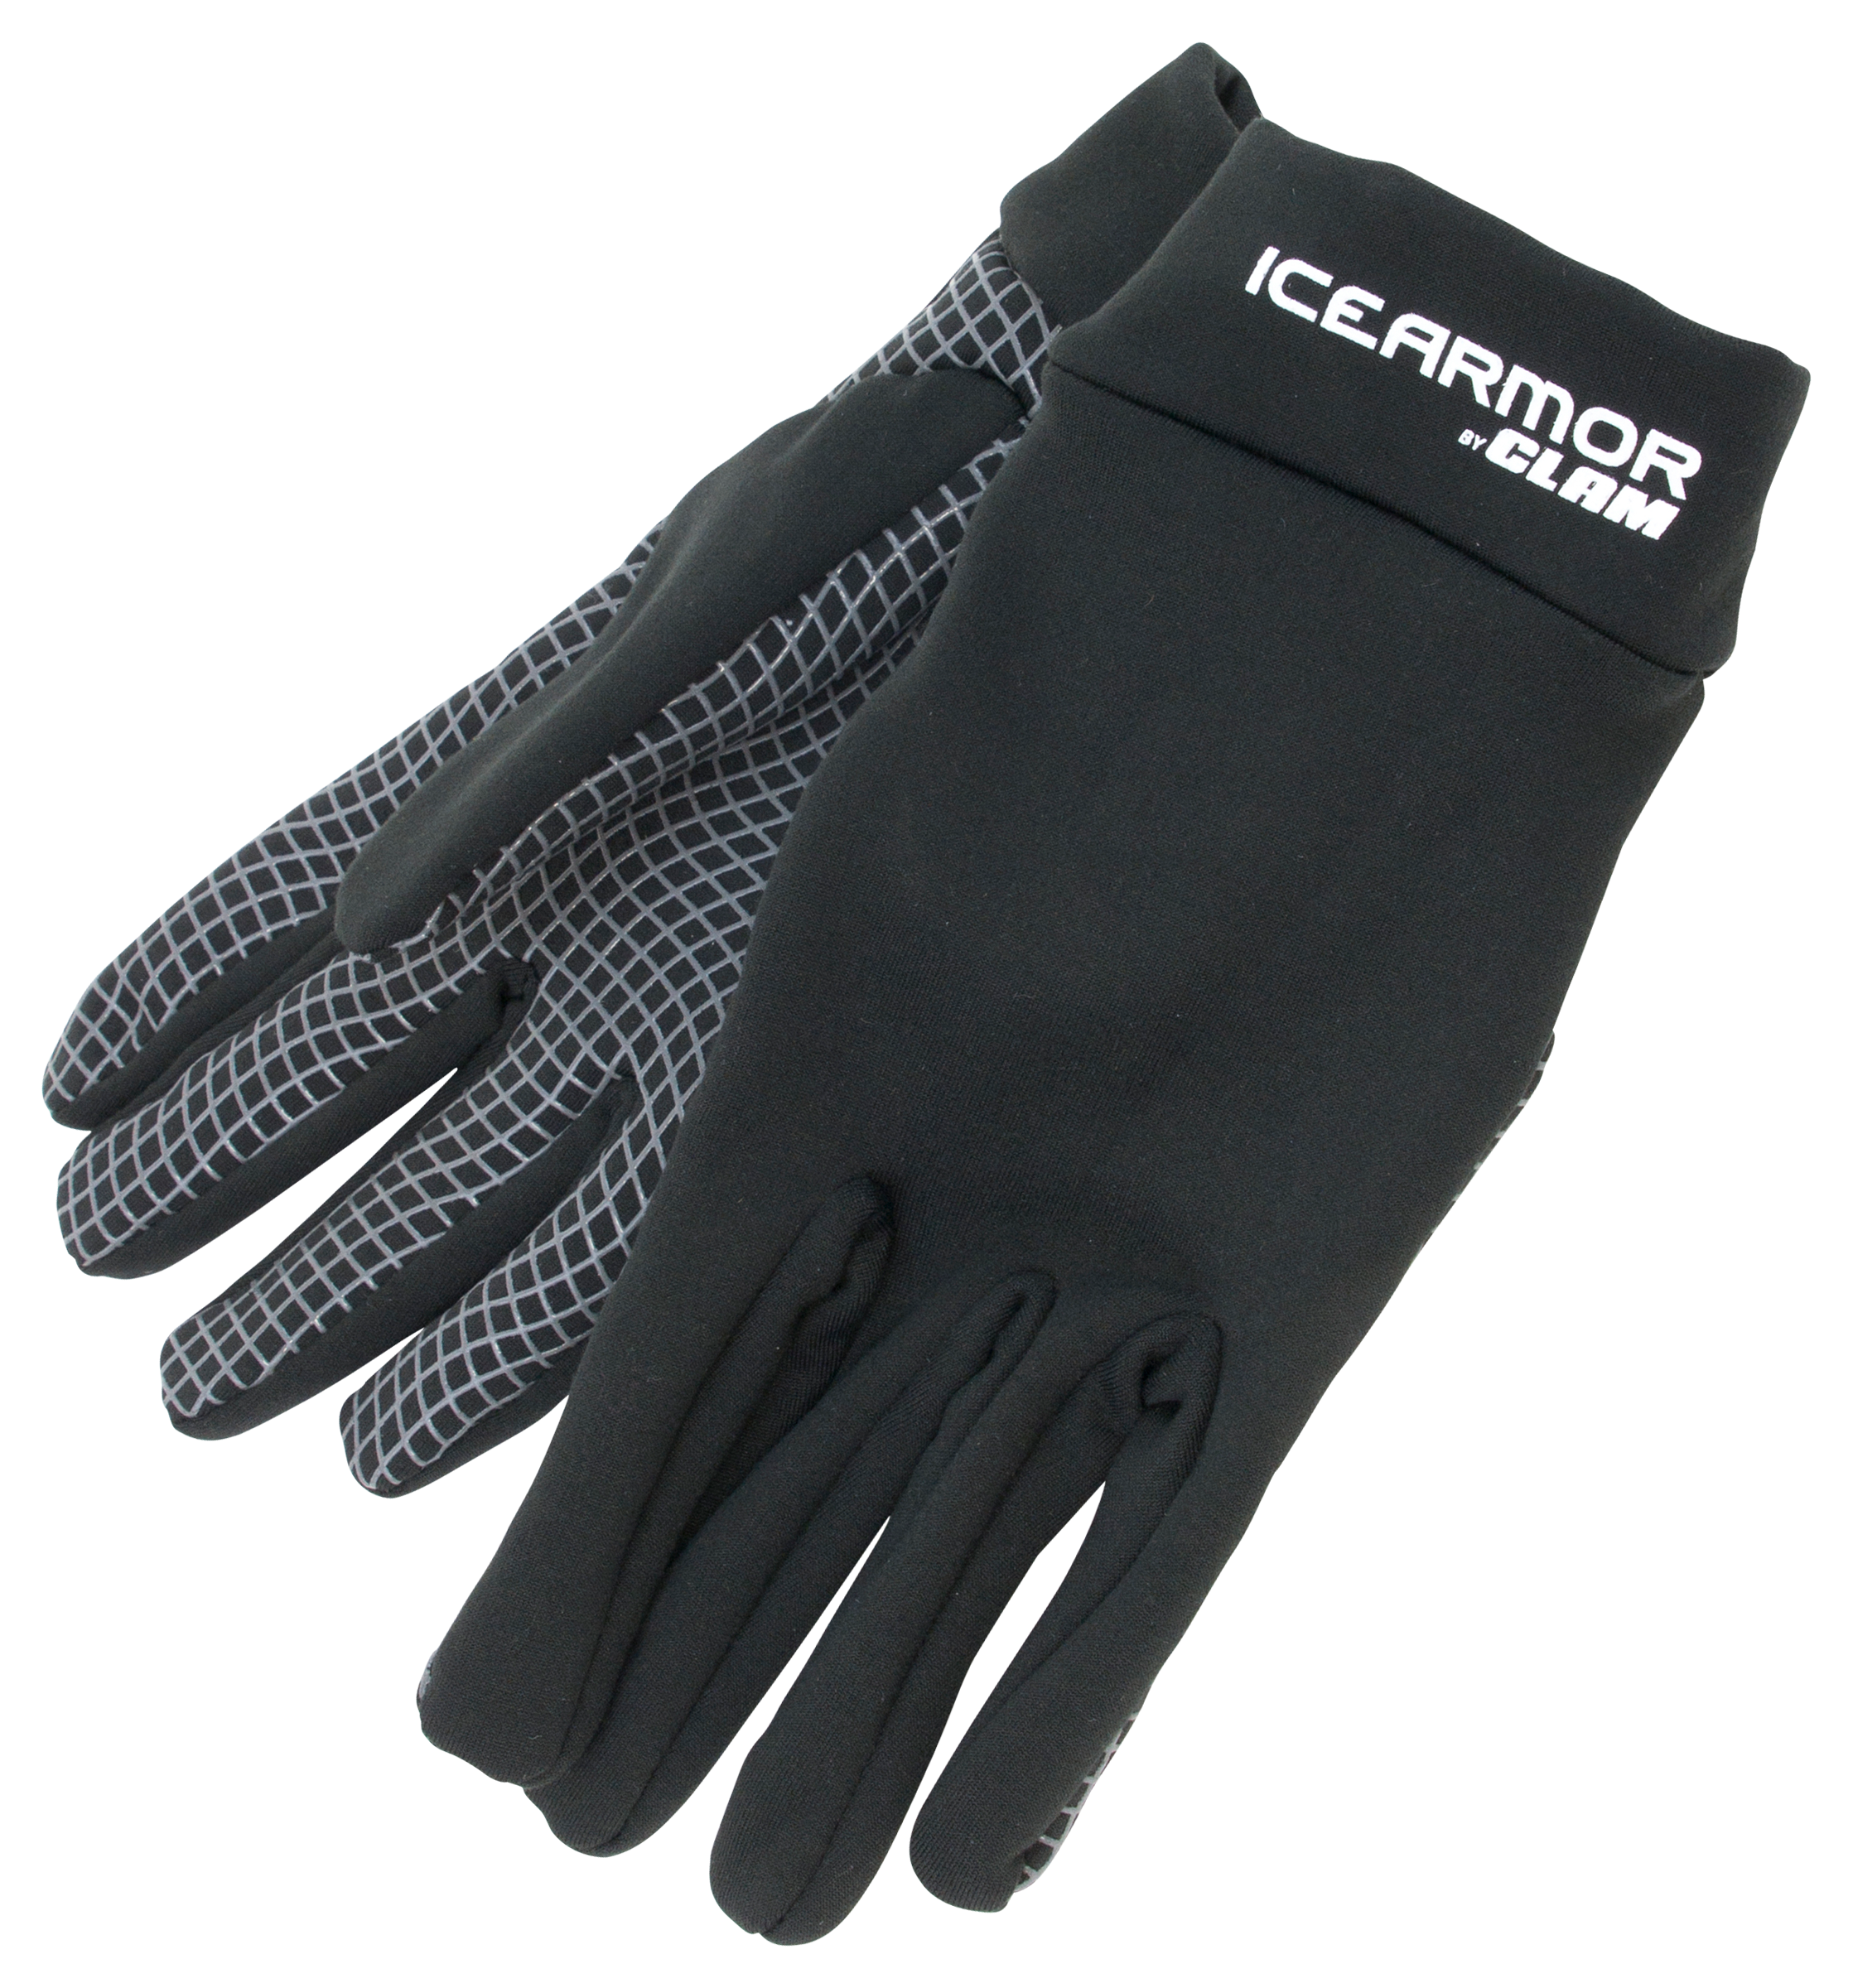 Clam Outdoors Waterproof Tactical Ice Fishing Glove - XL in the